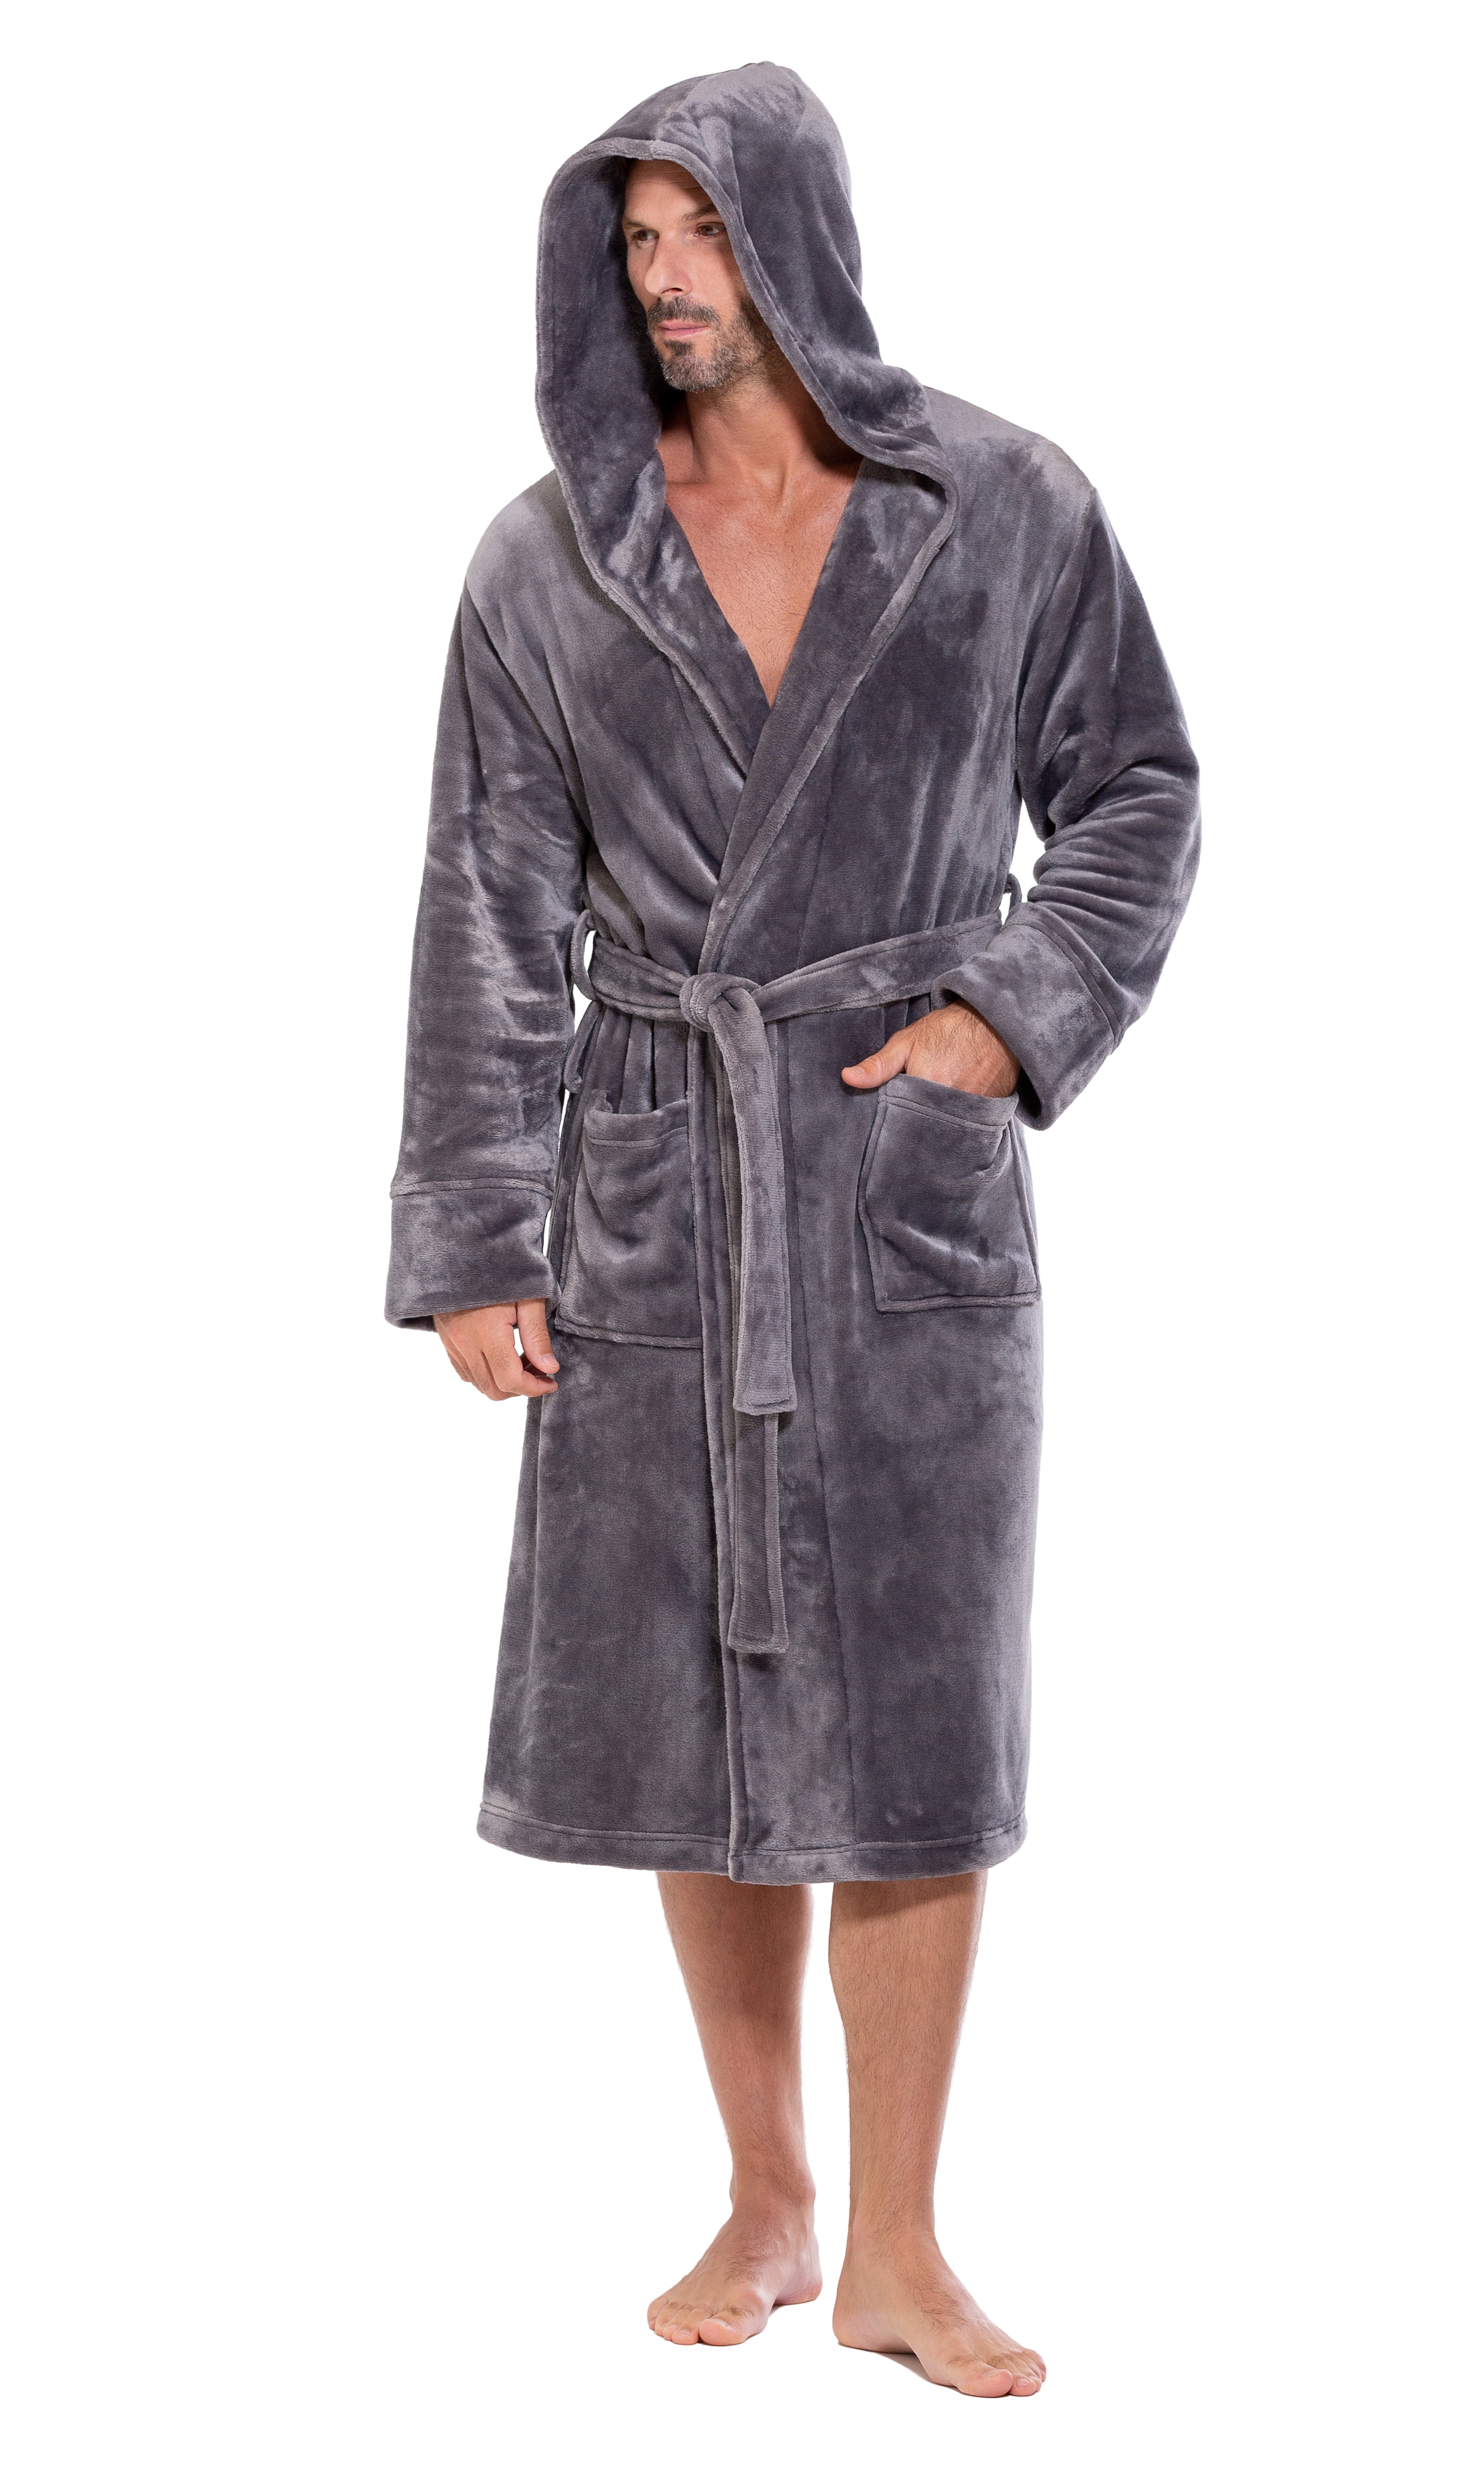 Plush Robes For Men, Soft Fuzzy Hooded Mens Bathrobes , Long Comfy Robe ...